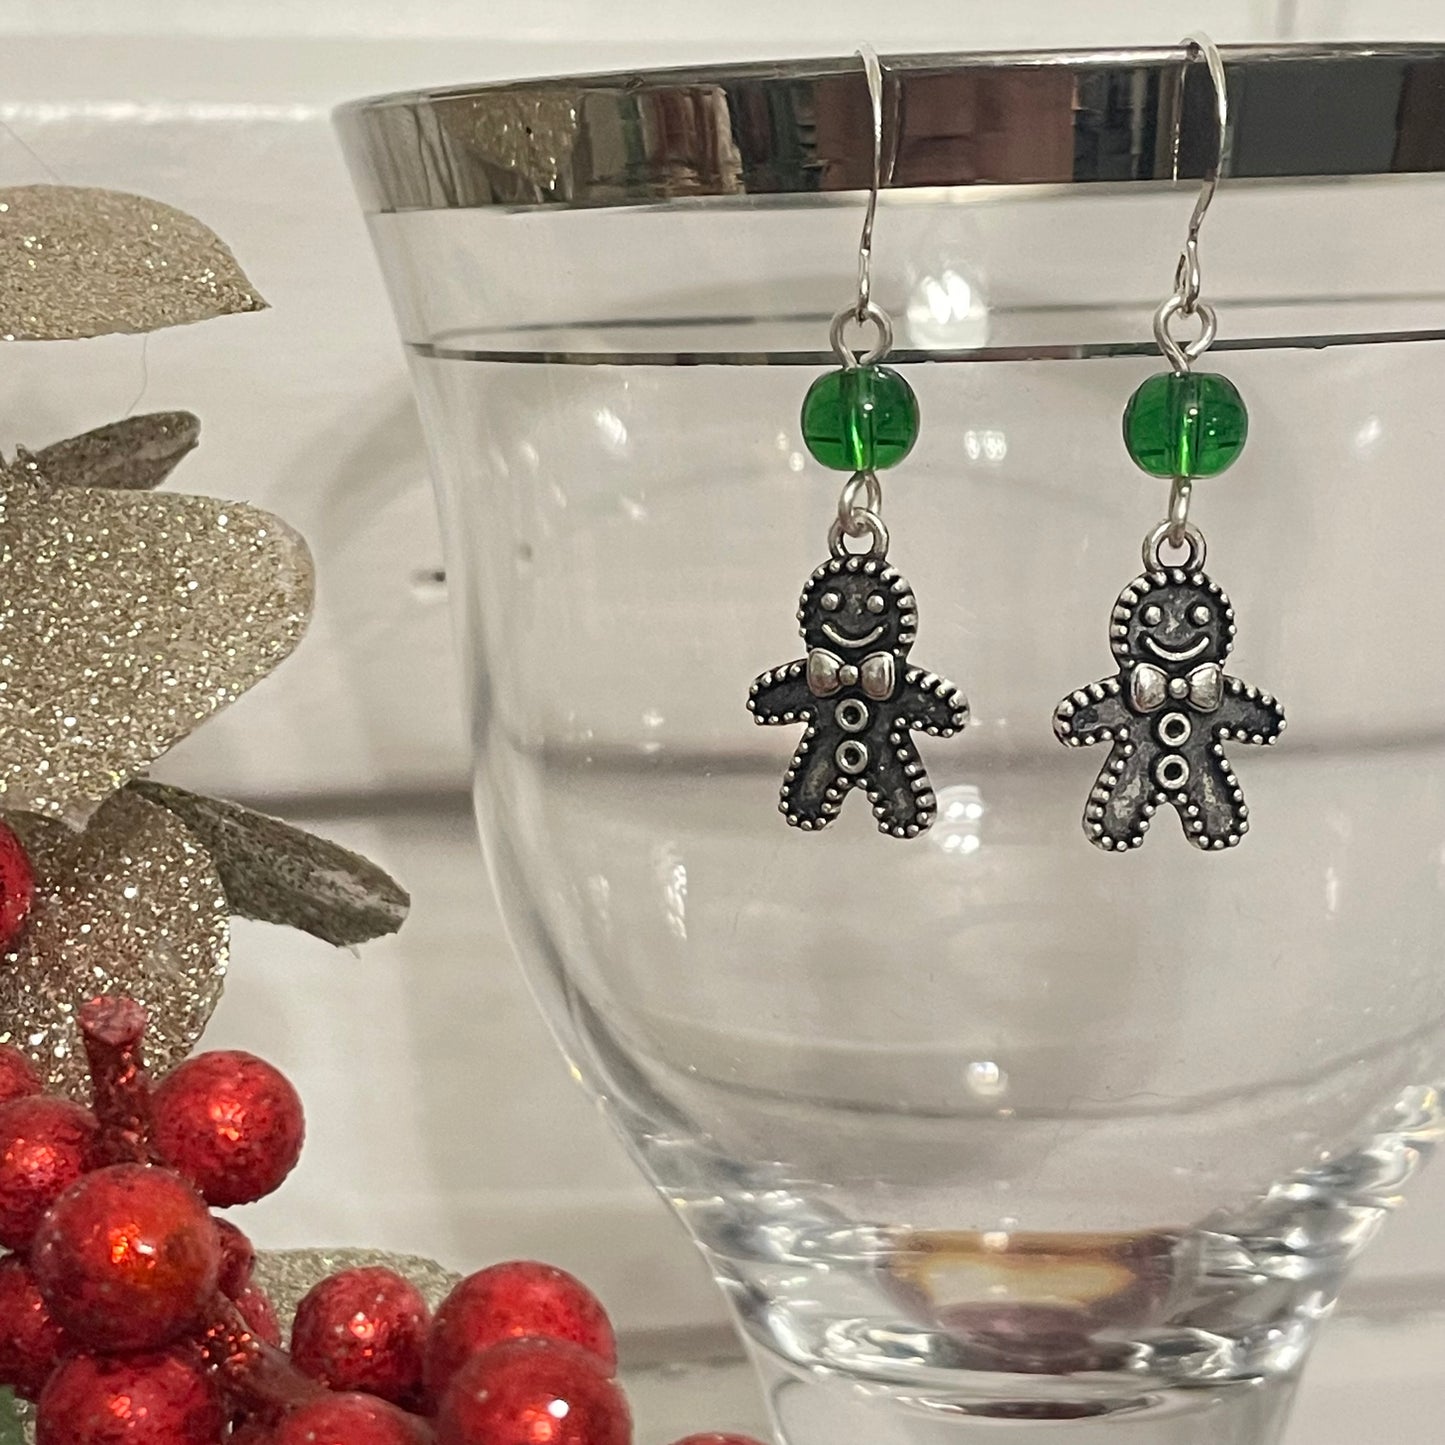 Handmade Gingerbread Charm Earrings Round Bead Accent Holiday Christmas Stocking December Secret Santa Mixed Metal Green Glass